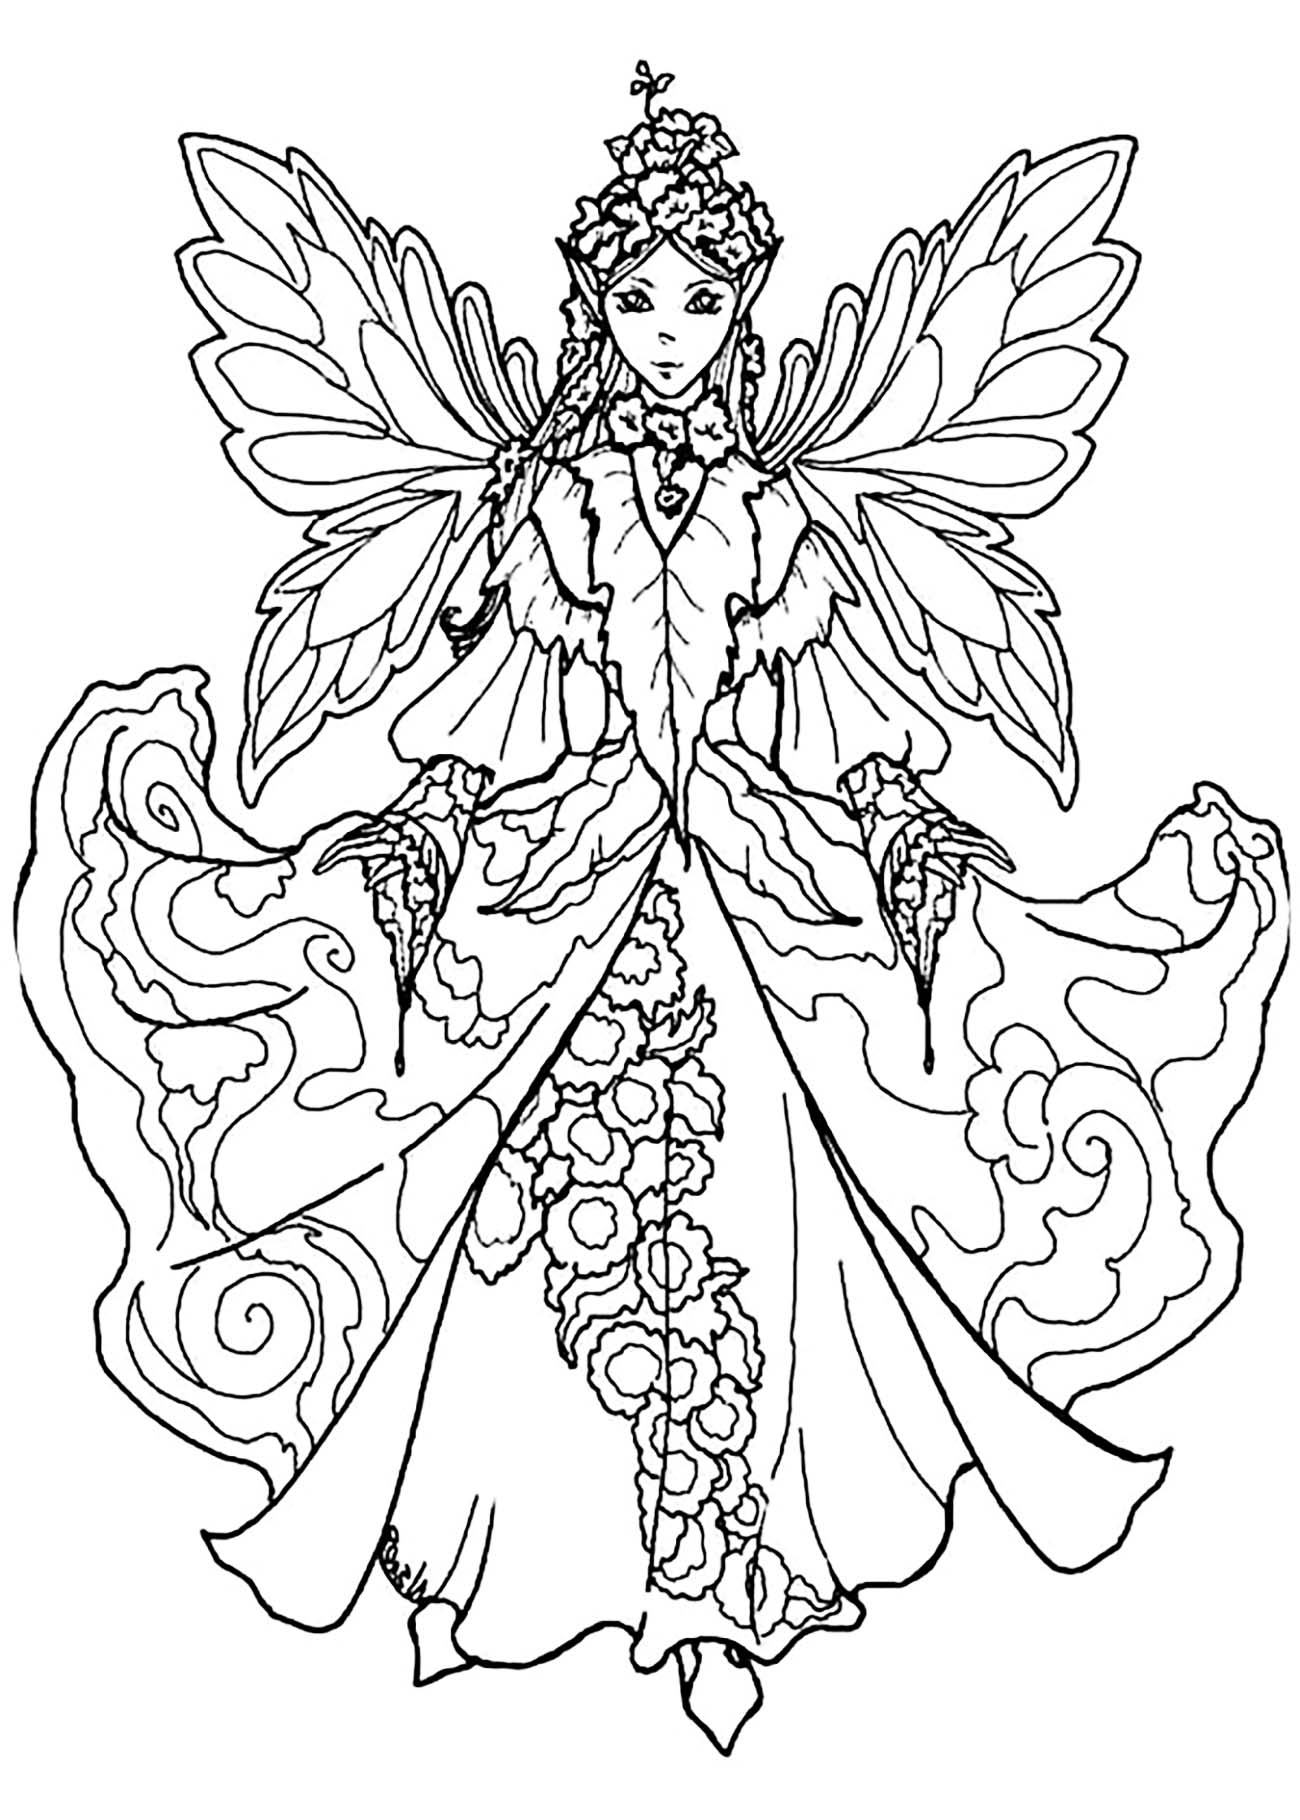 Fairy with impressive dress - Myths & legends Adult Coloring Pages